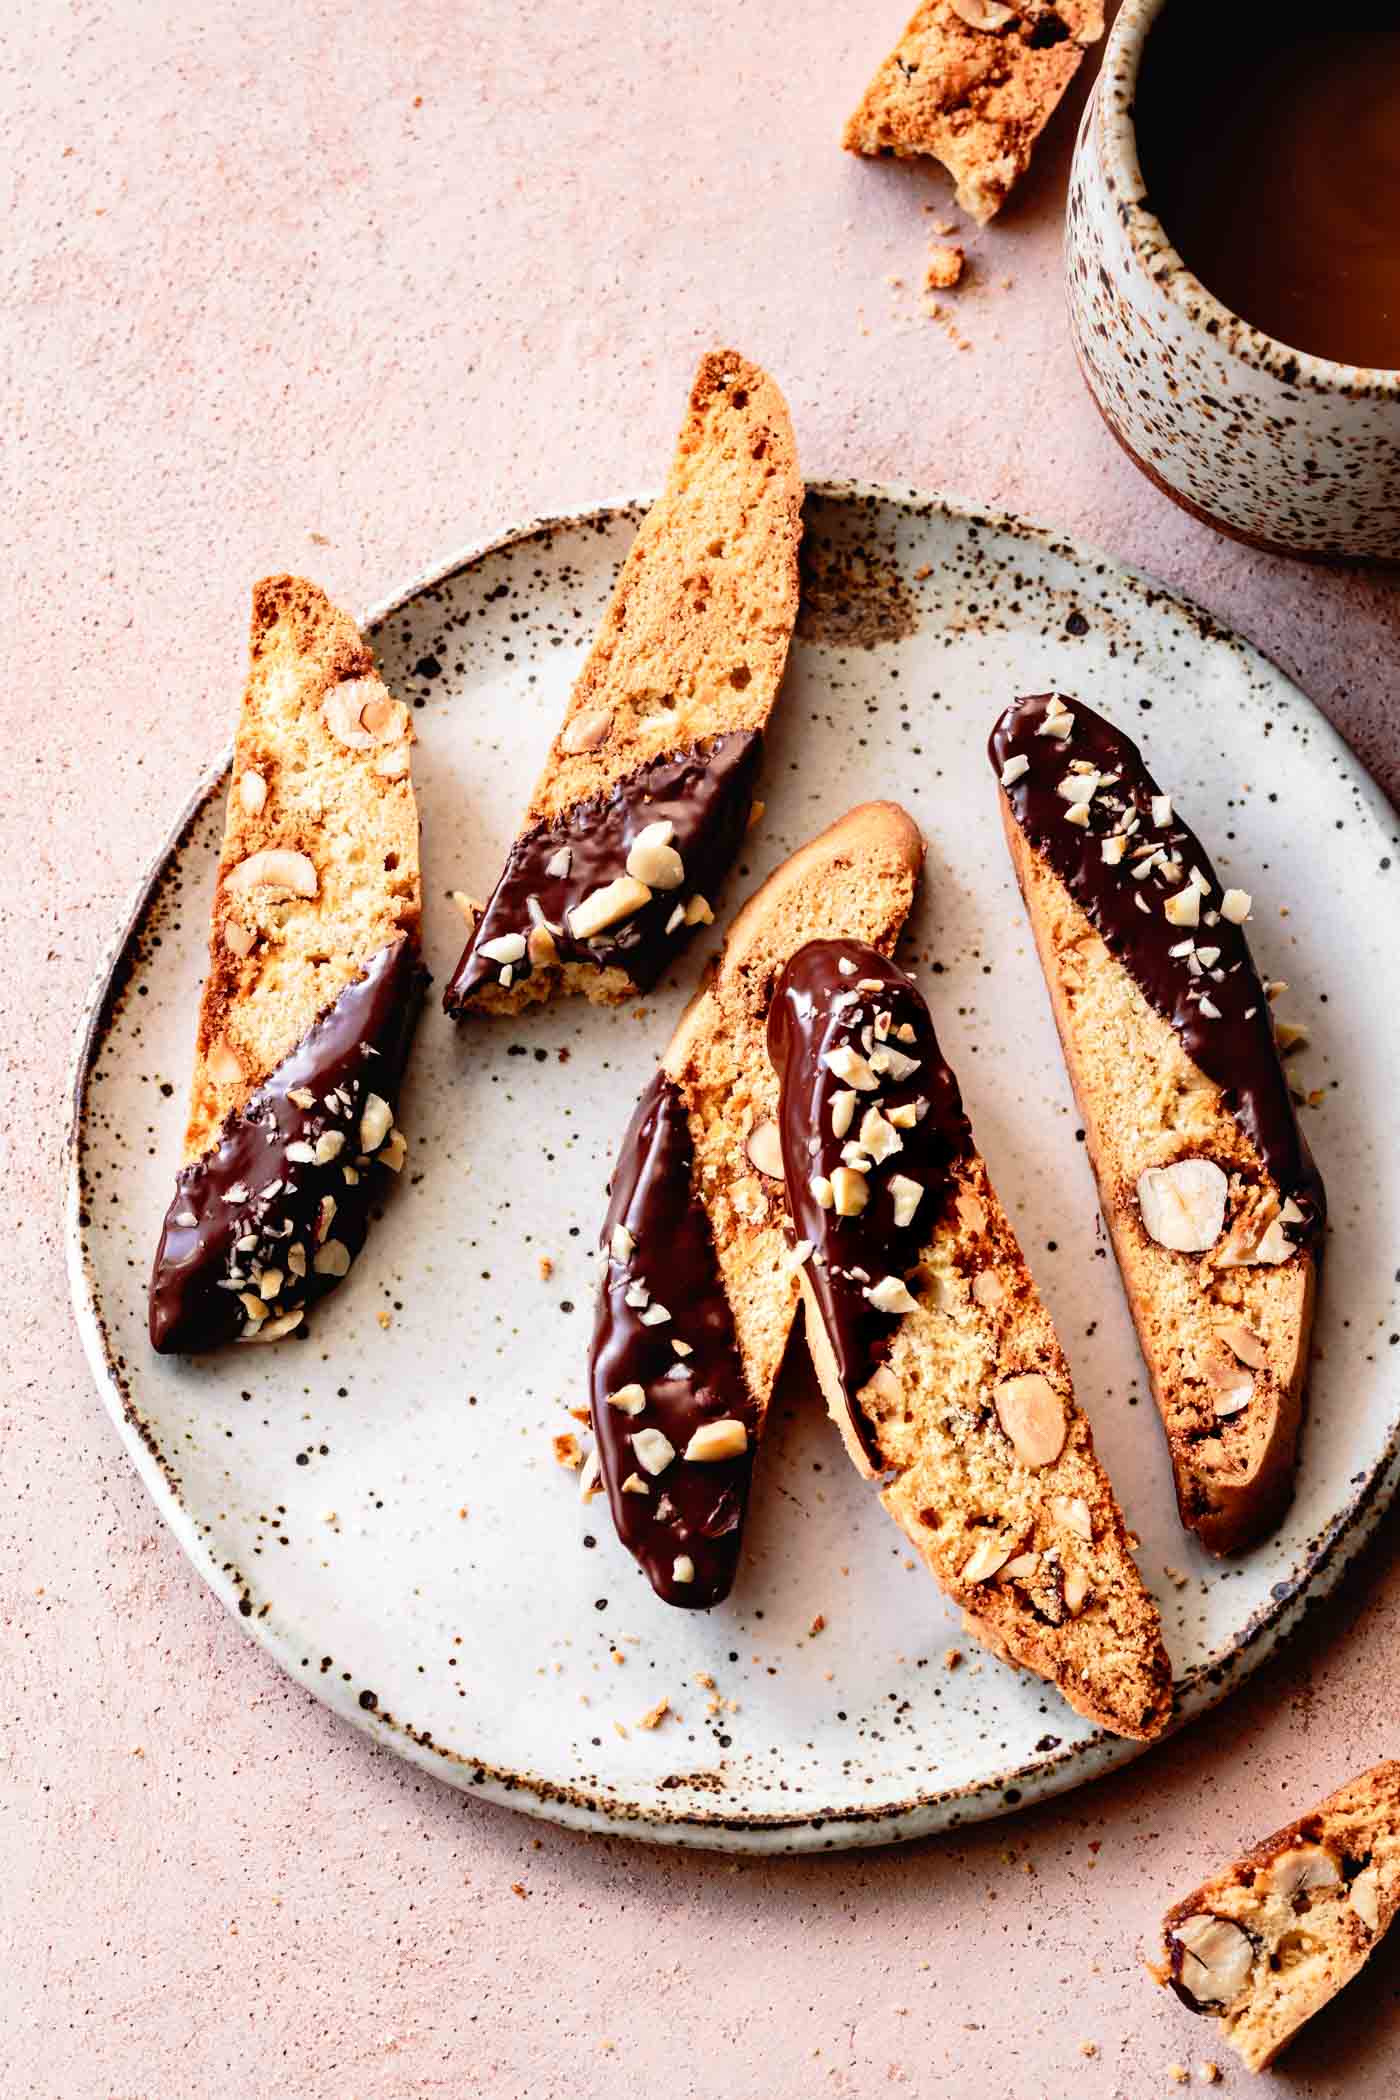 A plate of Gluten-Free Biscotti with Hazelnuts & Chocolate served with coffee